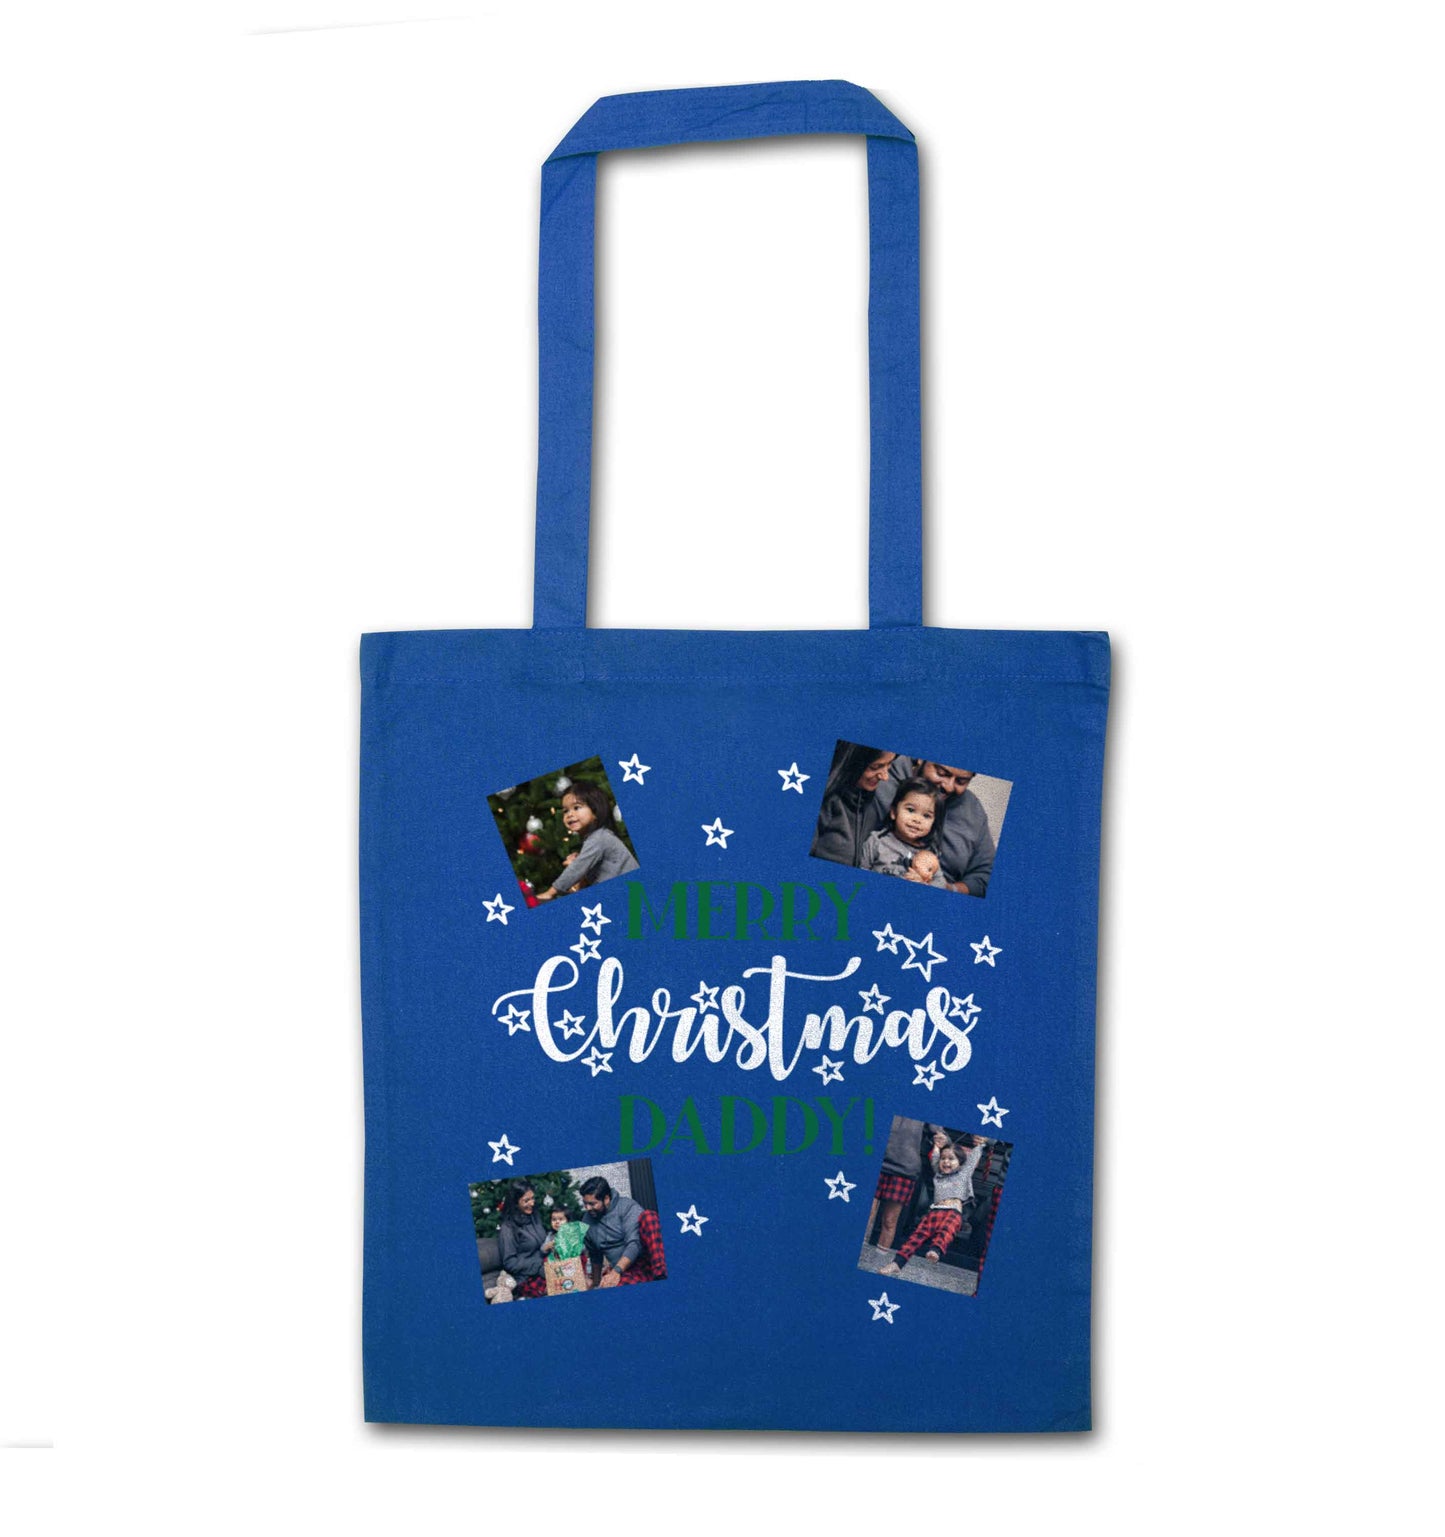 Merry Christmas daddy blue tote bag